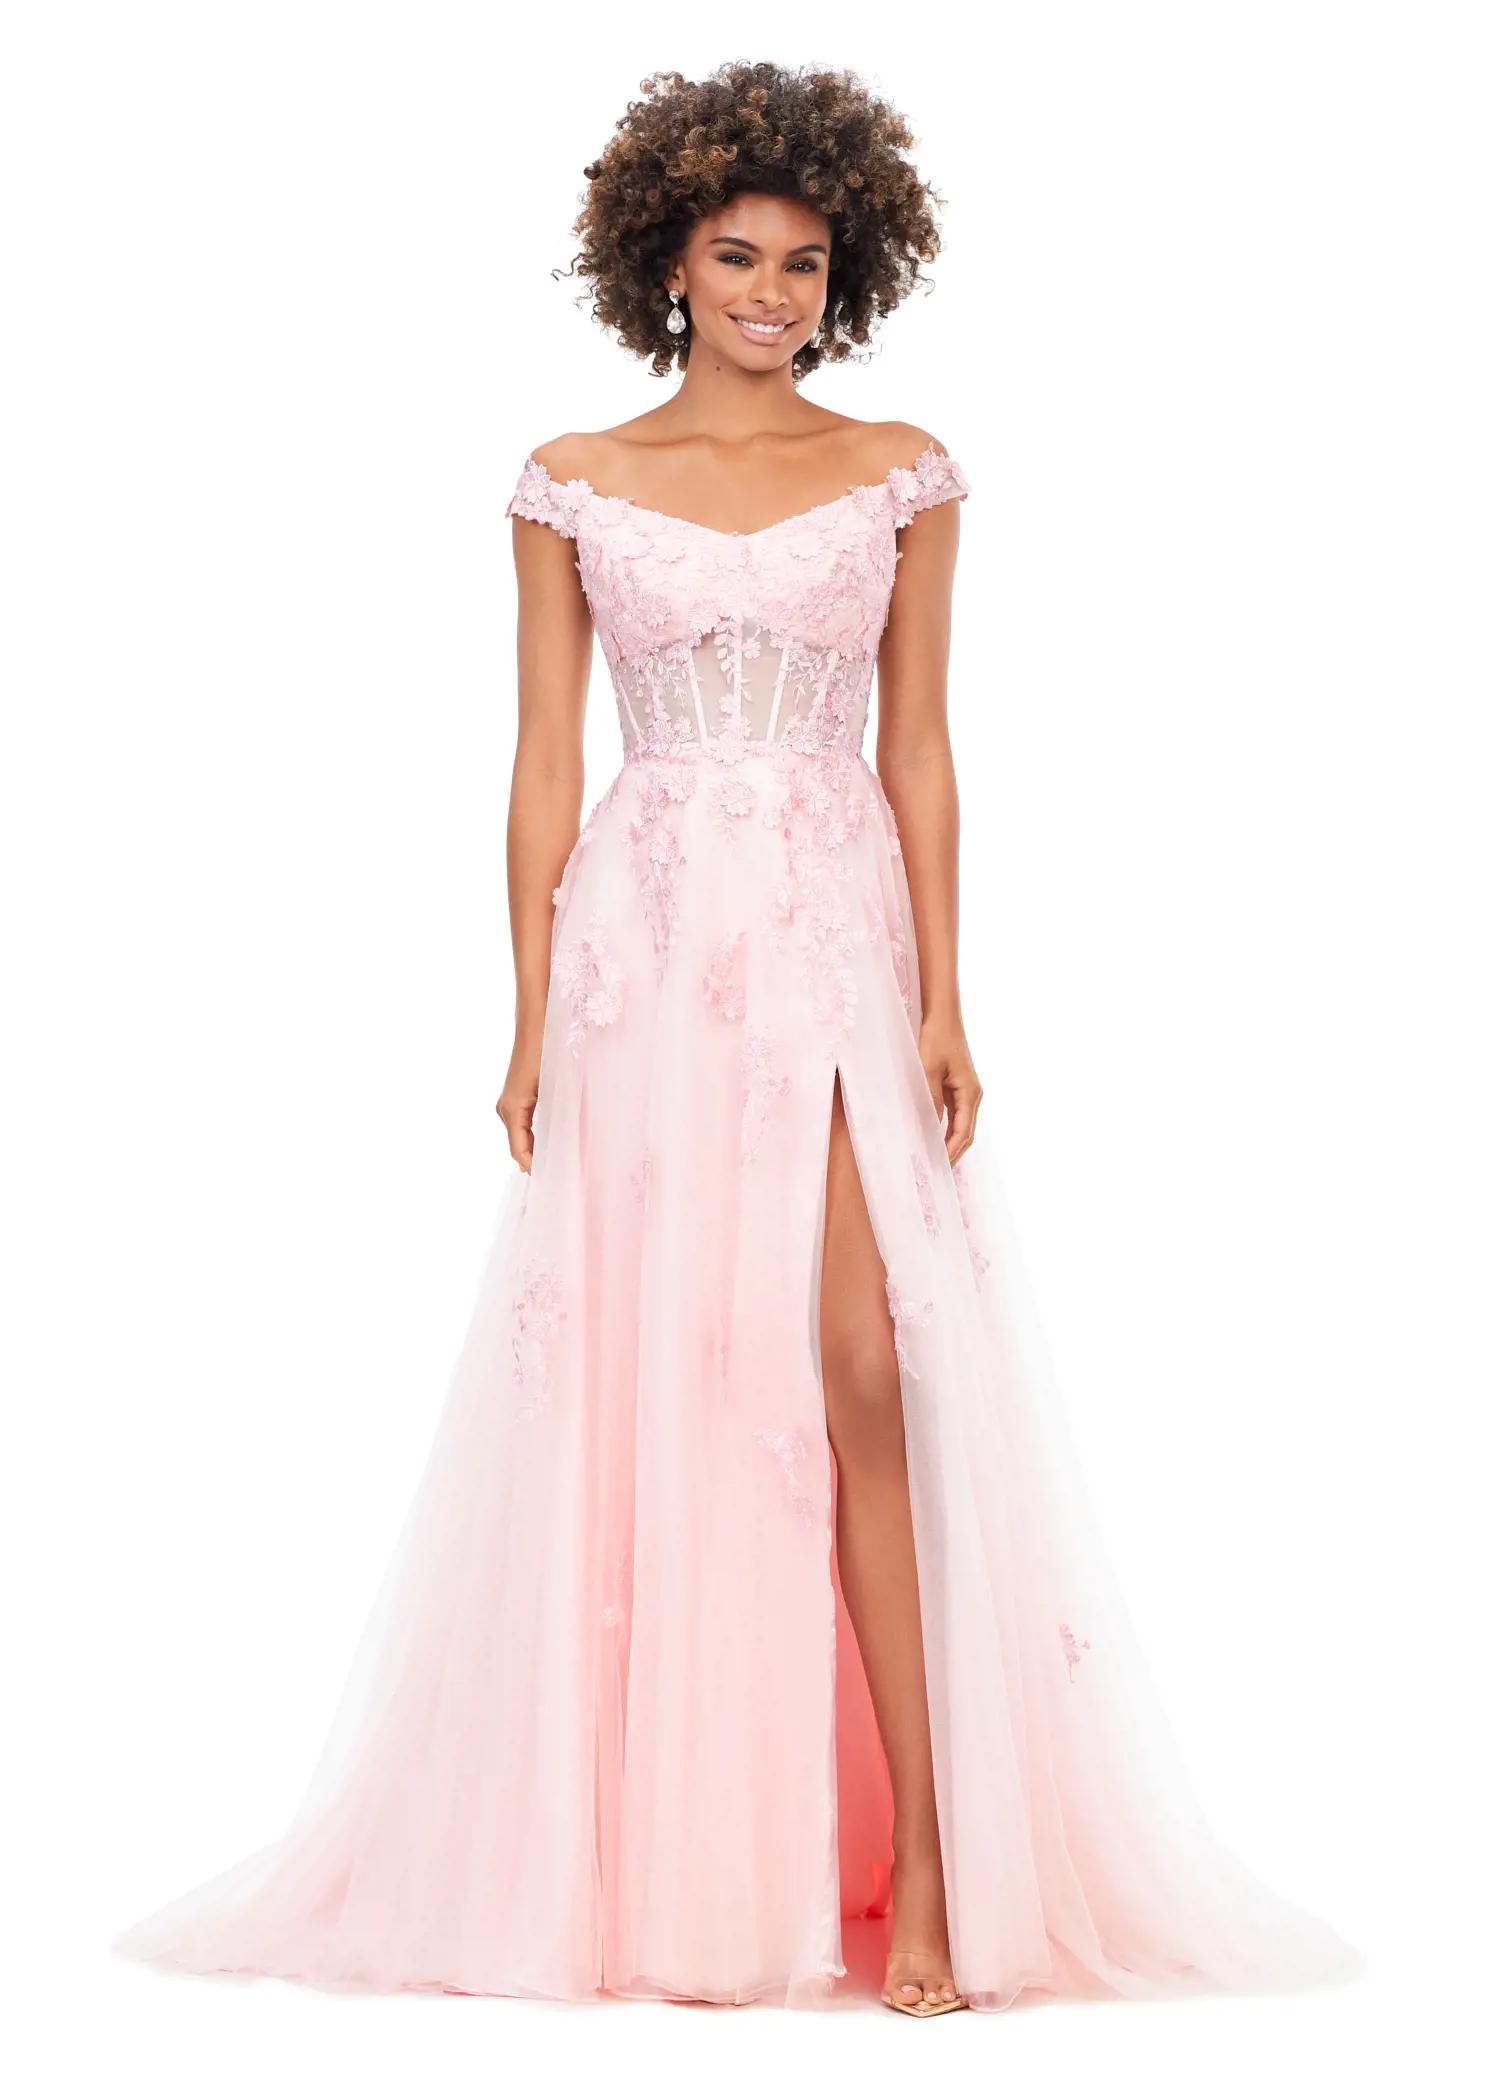 11376 Off The Shoulder Tulle Gown with Left Leg Slit